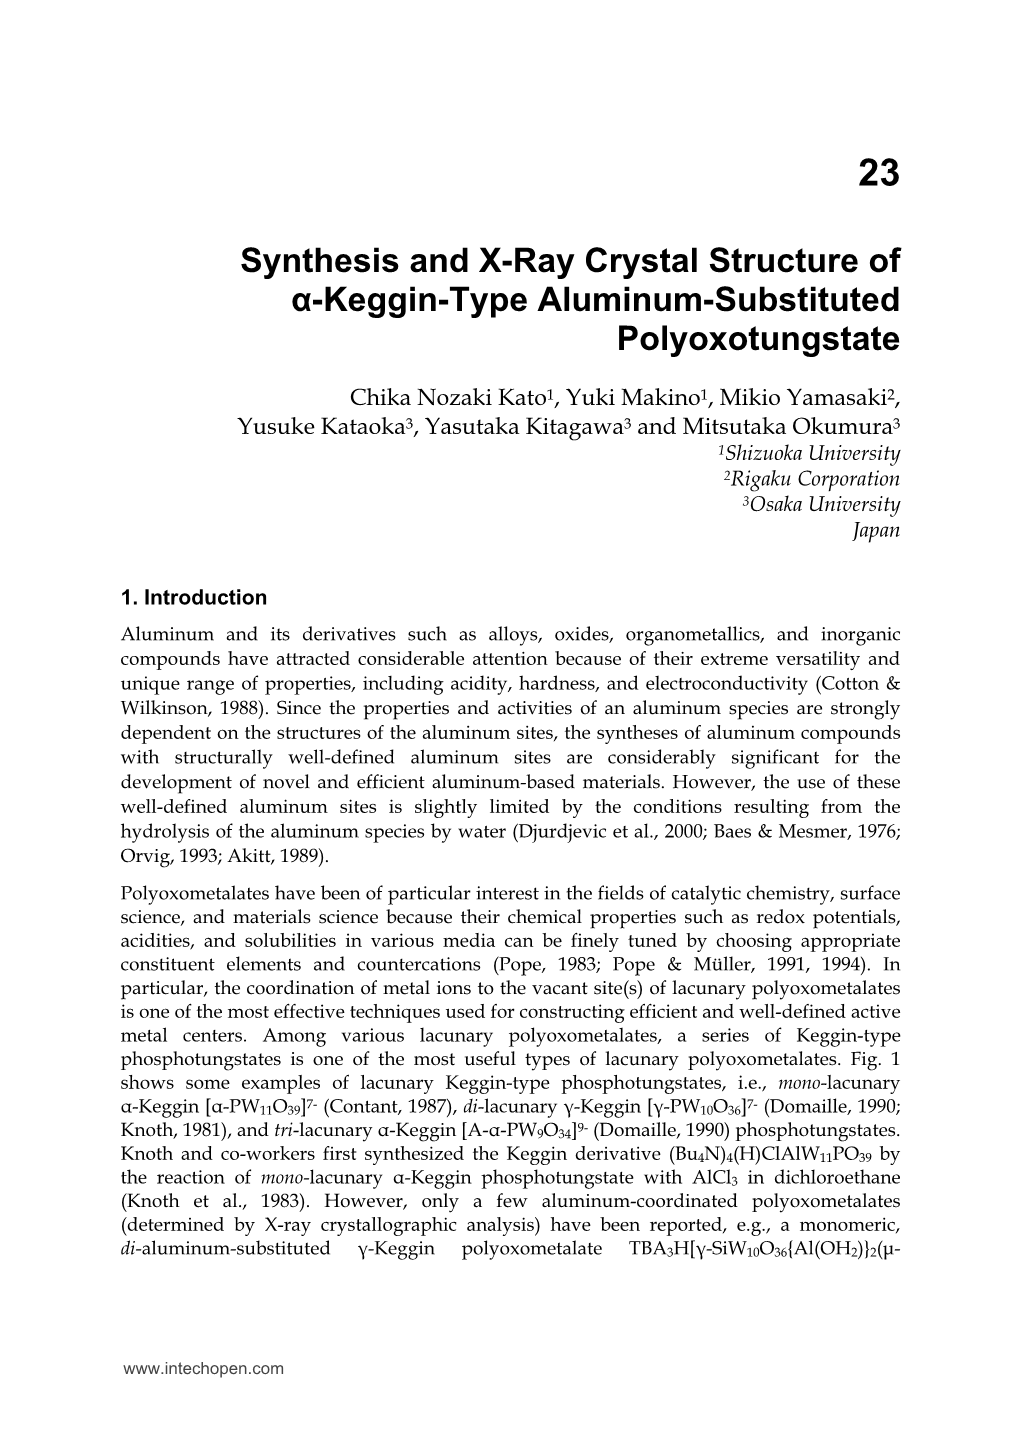 Synthesis and X-Ray Crystal Structure of Α-Keggin-Type Aluminum-Substituted Polyoxotungstate